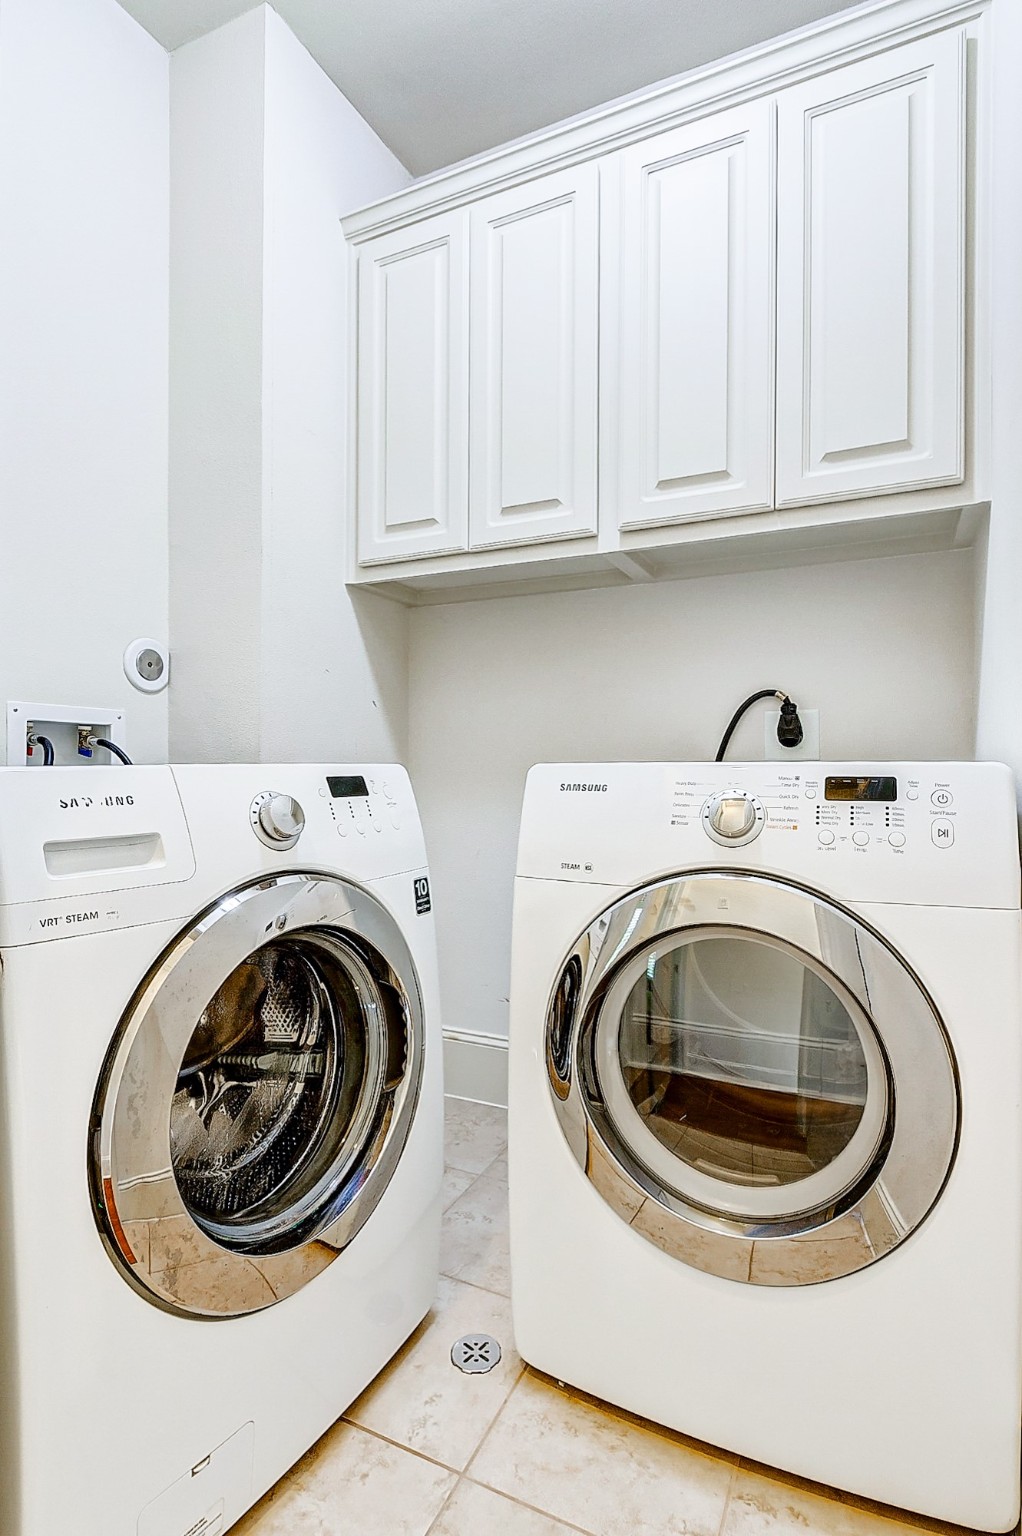 Your in-home utility room is conveniently located on the 3rd floor of your new home large enough to fit your favorite front or top load washer & dryer.